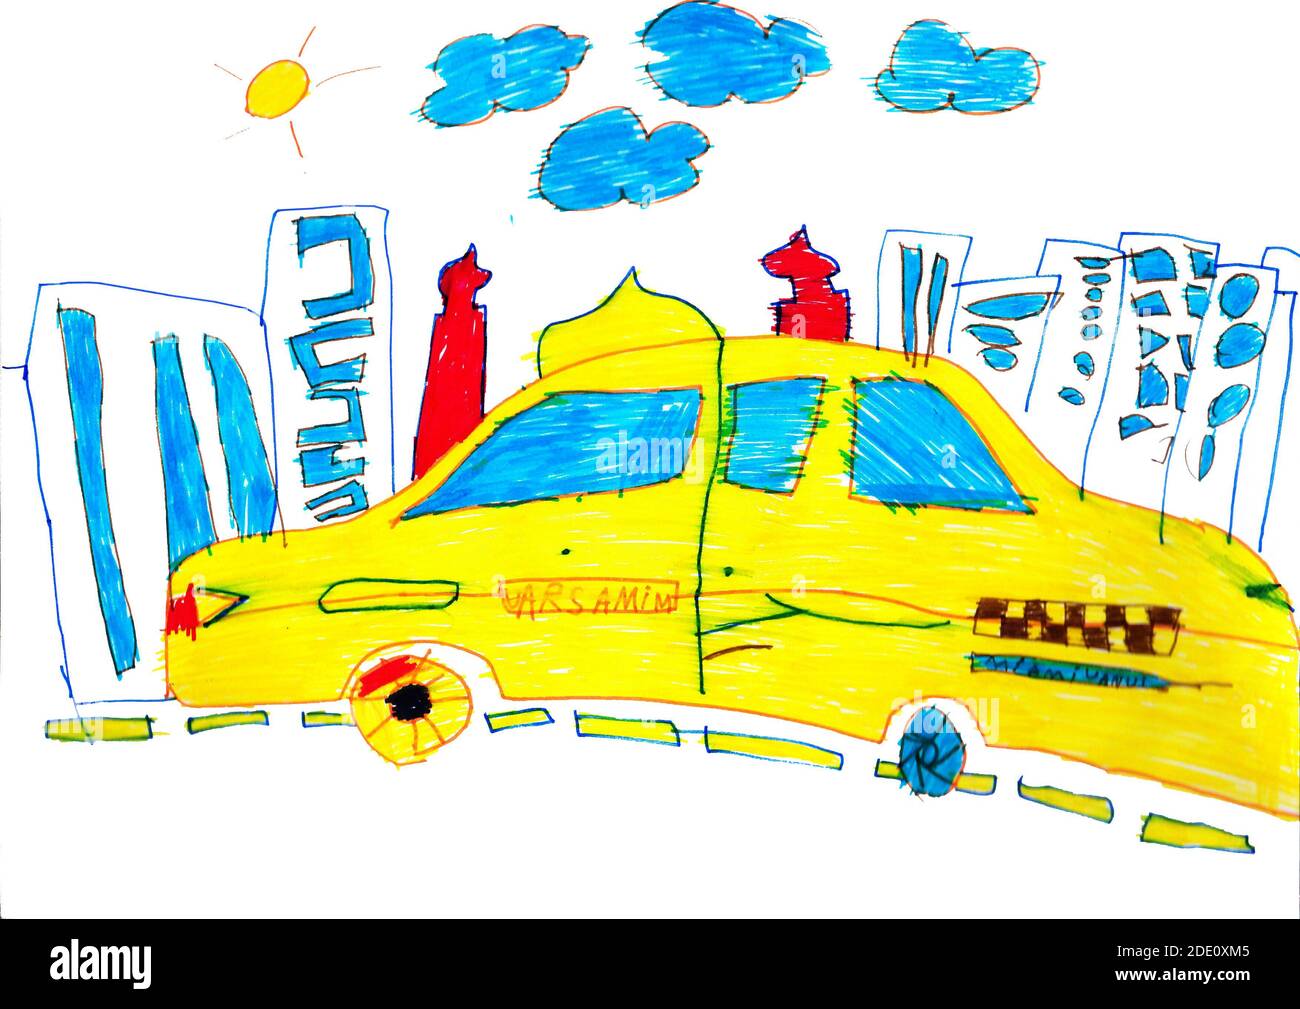 kid 5 years old drawing sketch yellow taxi car in the city ilustration Stock Photo